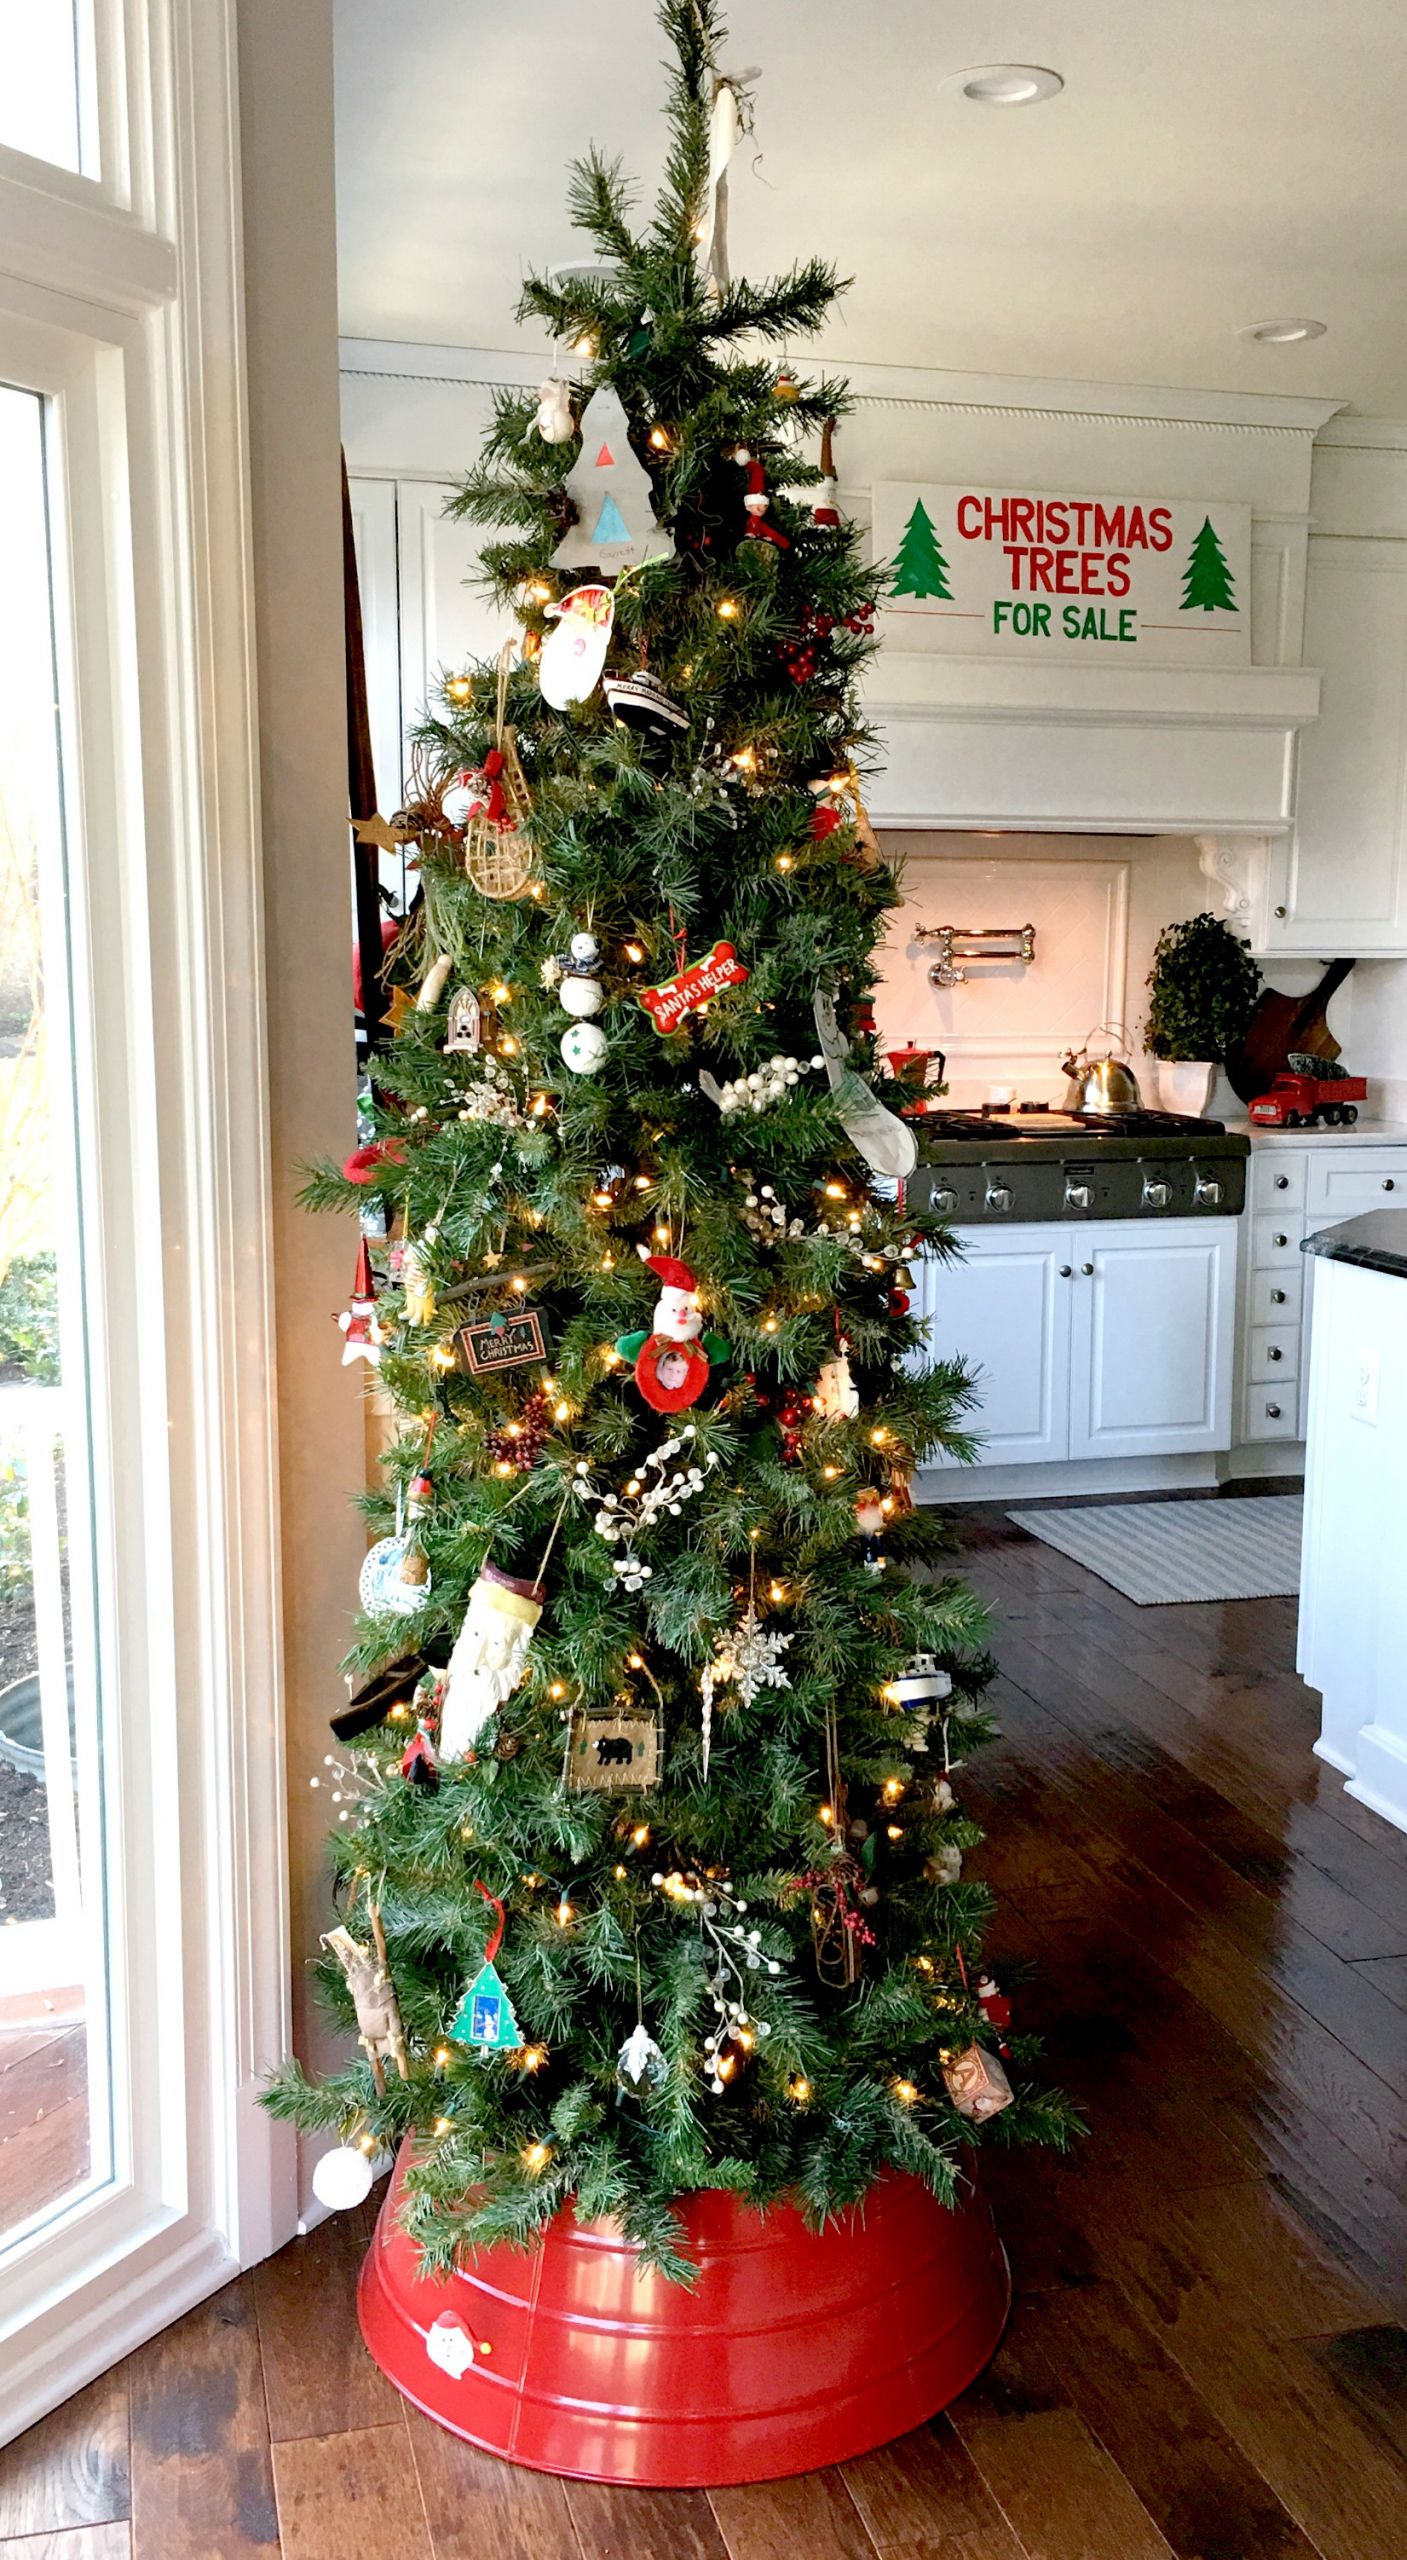 Kitchen Christmas Tree
 Decorating for Christmas in the Kitchen Stylish Revamp